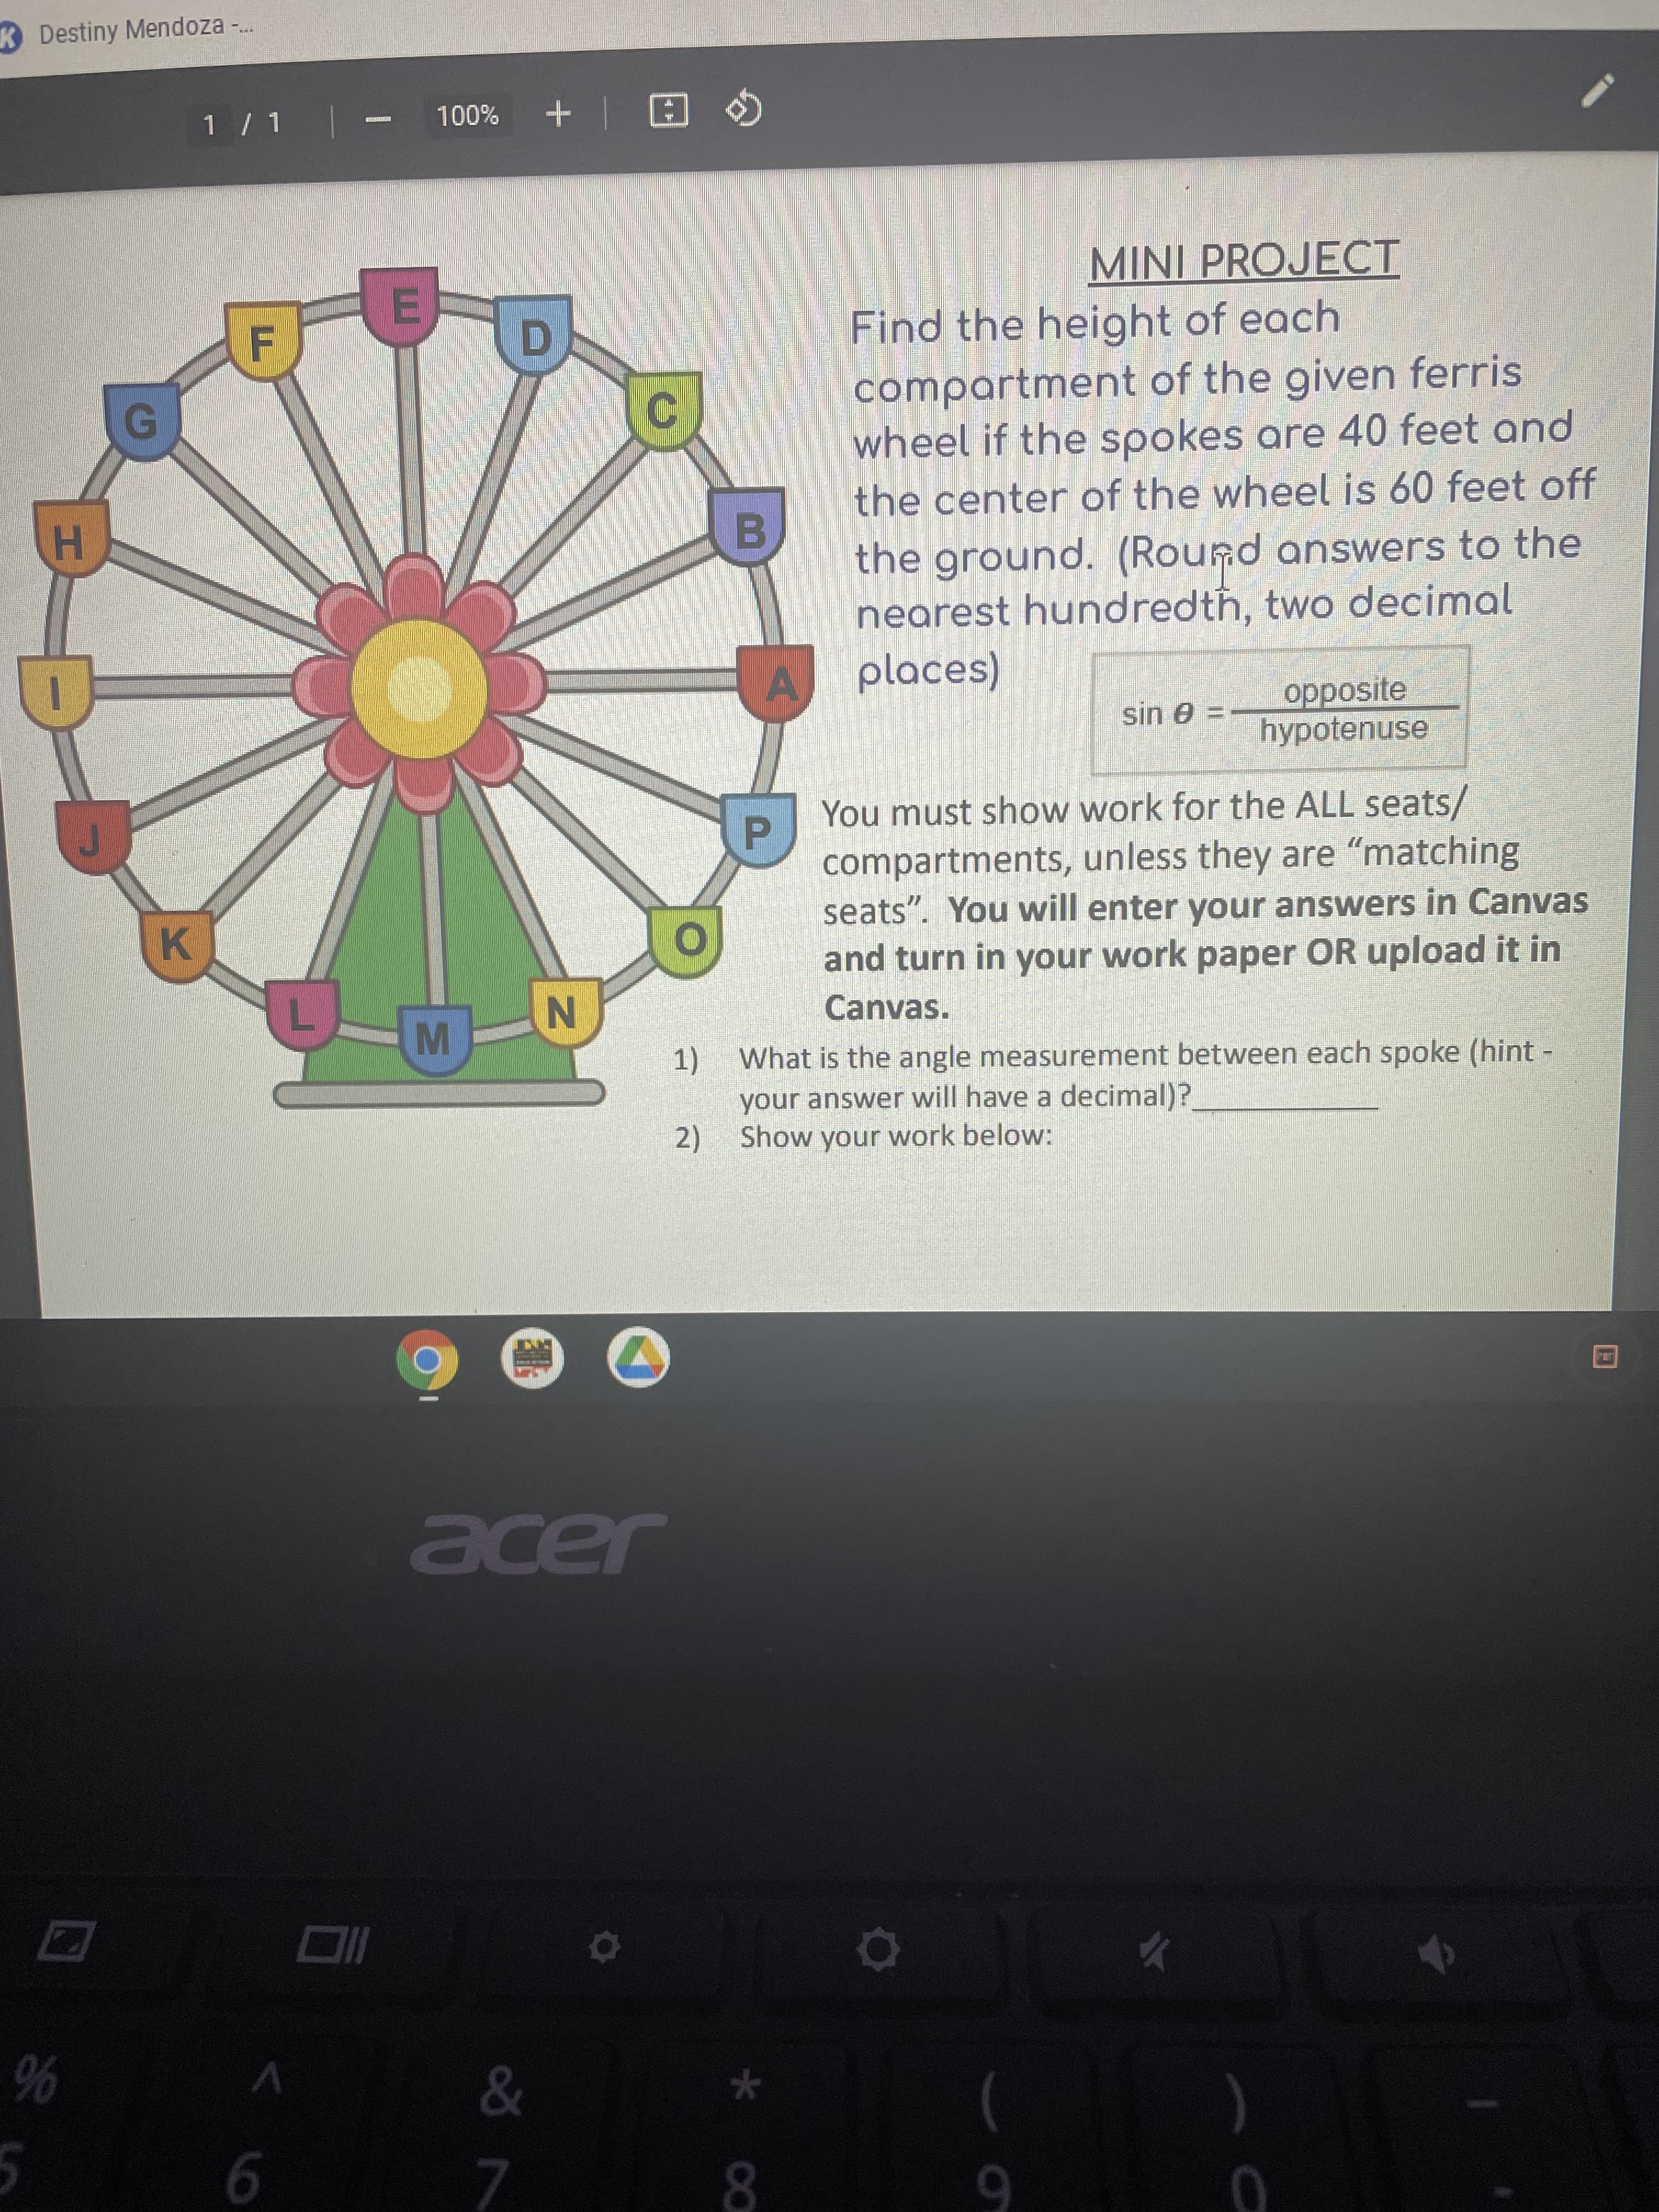 K Destiny Mendoza -.
1 / 1
ARERERES
%00L
O HI +
MINI PROJECT
Find the height of each
compartment of the given ferris
wheel if the spokes are 40 feet and
the center of the wheel is 60 feet off
G.
C.
the ground. (Round answers to the
nearest hundredtħ, two decimal
places)
H.
opposite
sin e =hypotenuse
You must show work for the ALL seats/
compartments, unless they are "matching
seats". You will enter your answers in Canvas
and turn in your work paper OR upload it in
K.
Canvas.
N.
1) What is the angle measurement between each spoke (hint -
your answer will have a decimal)?
2) Show your work below:
Jer
7.
